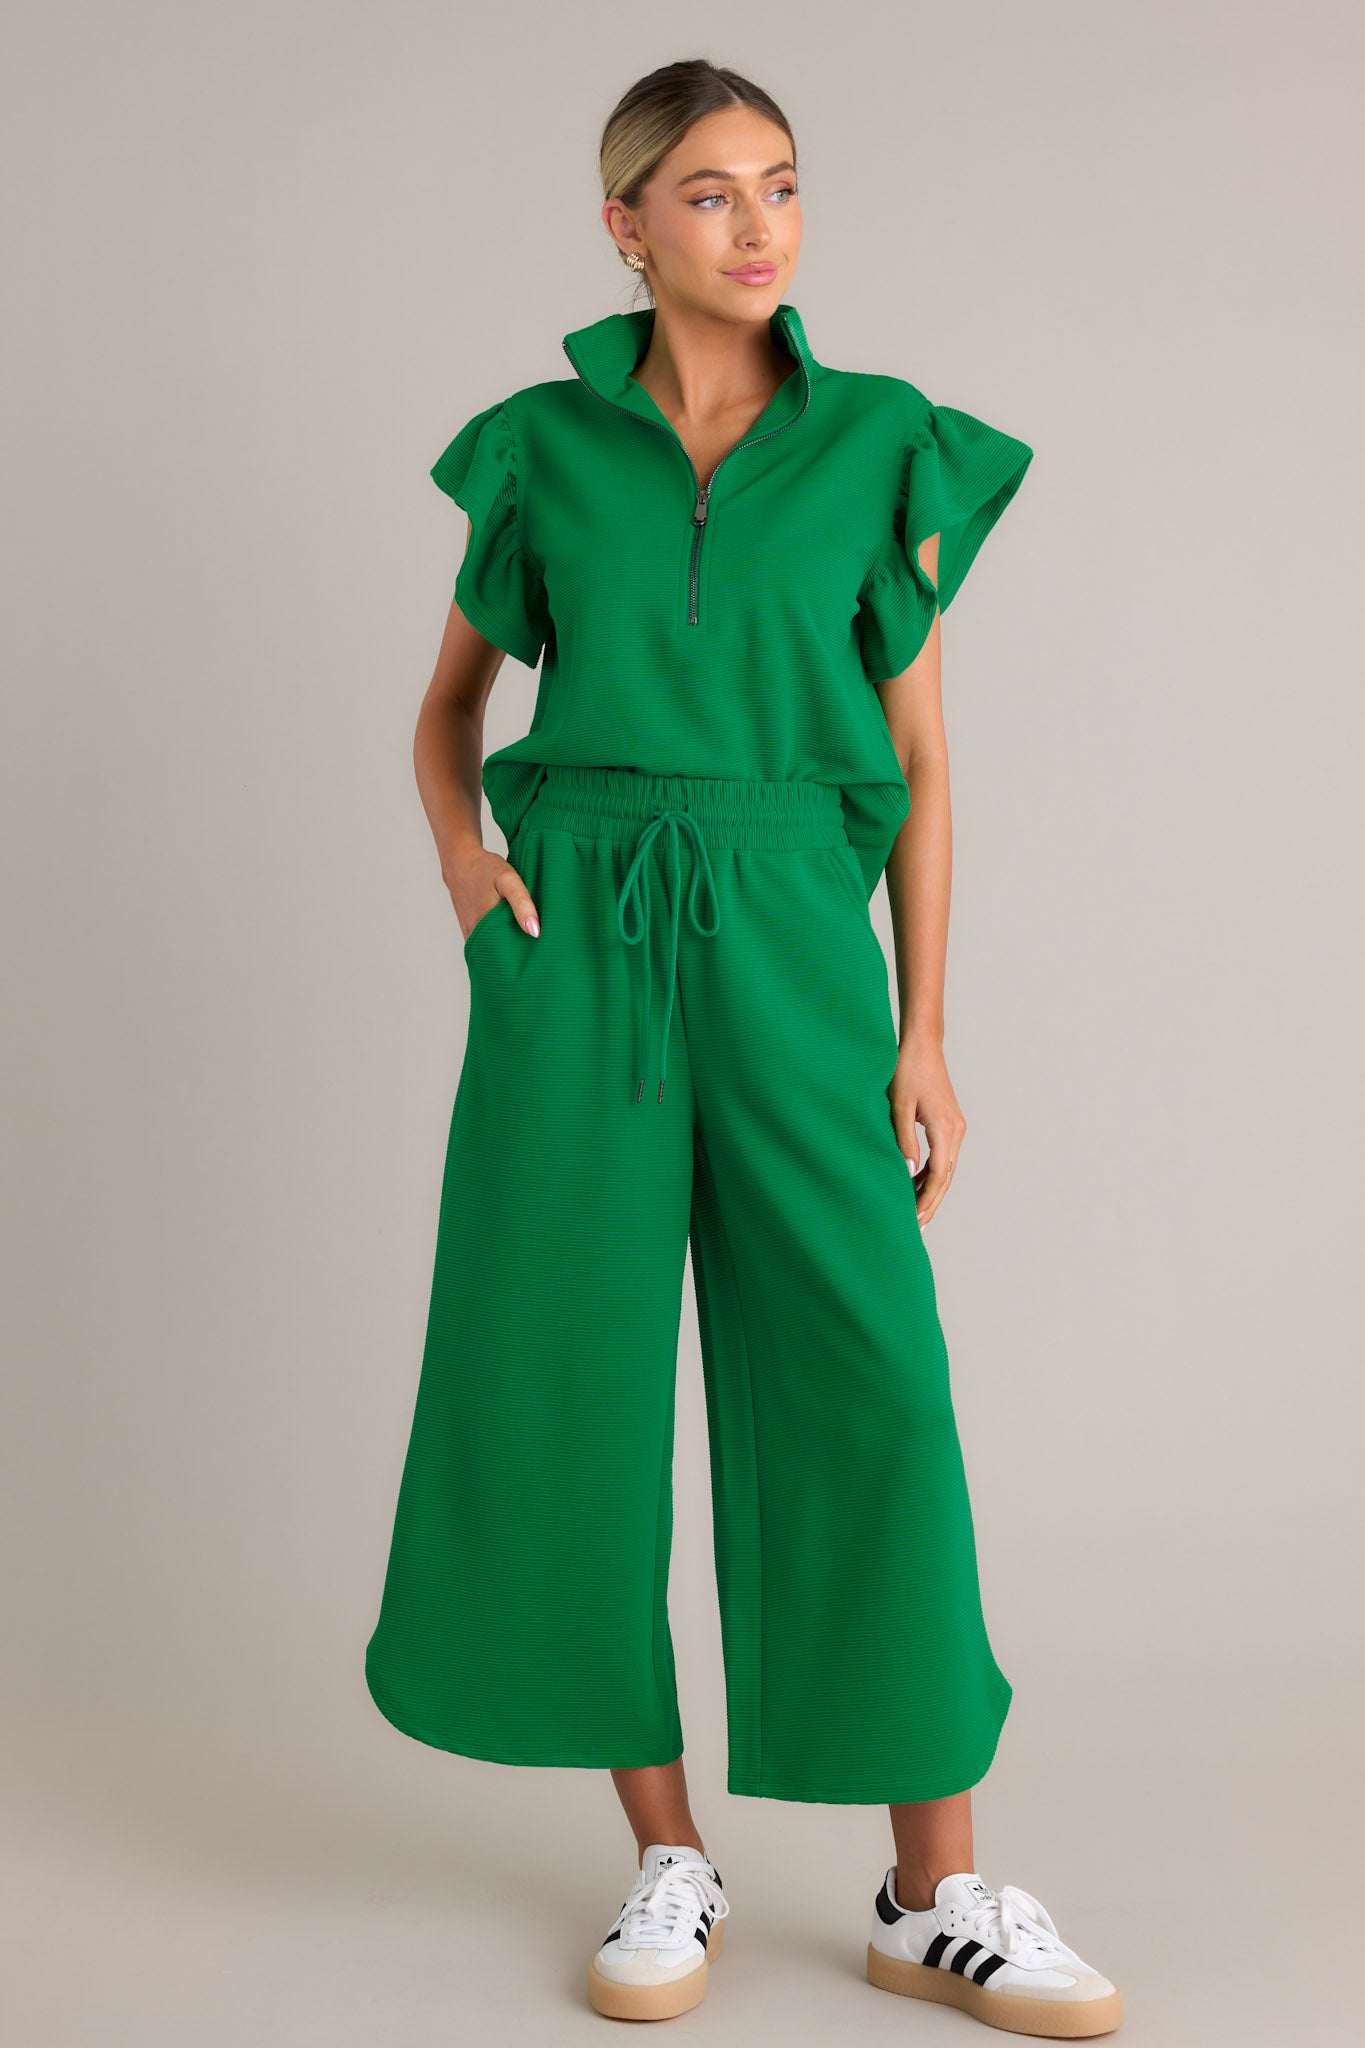 These green pants feature a high waisted design, an elastic waistband, a self-tie drawstring, functional hip pockets, a ribbed texture, a wide leg, and a scooped hemline.